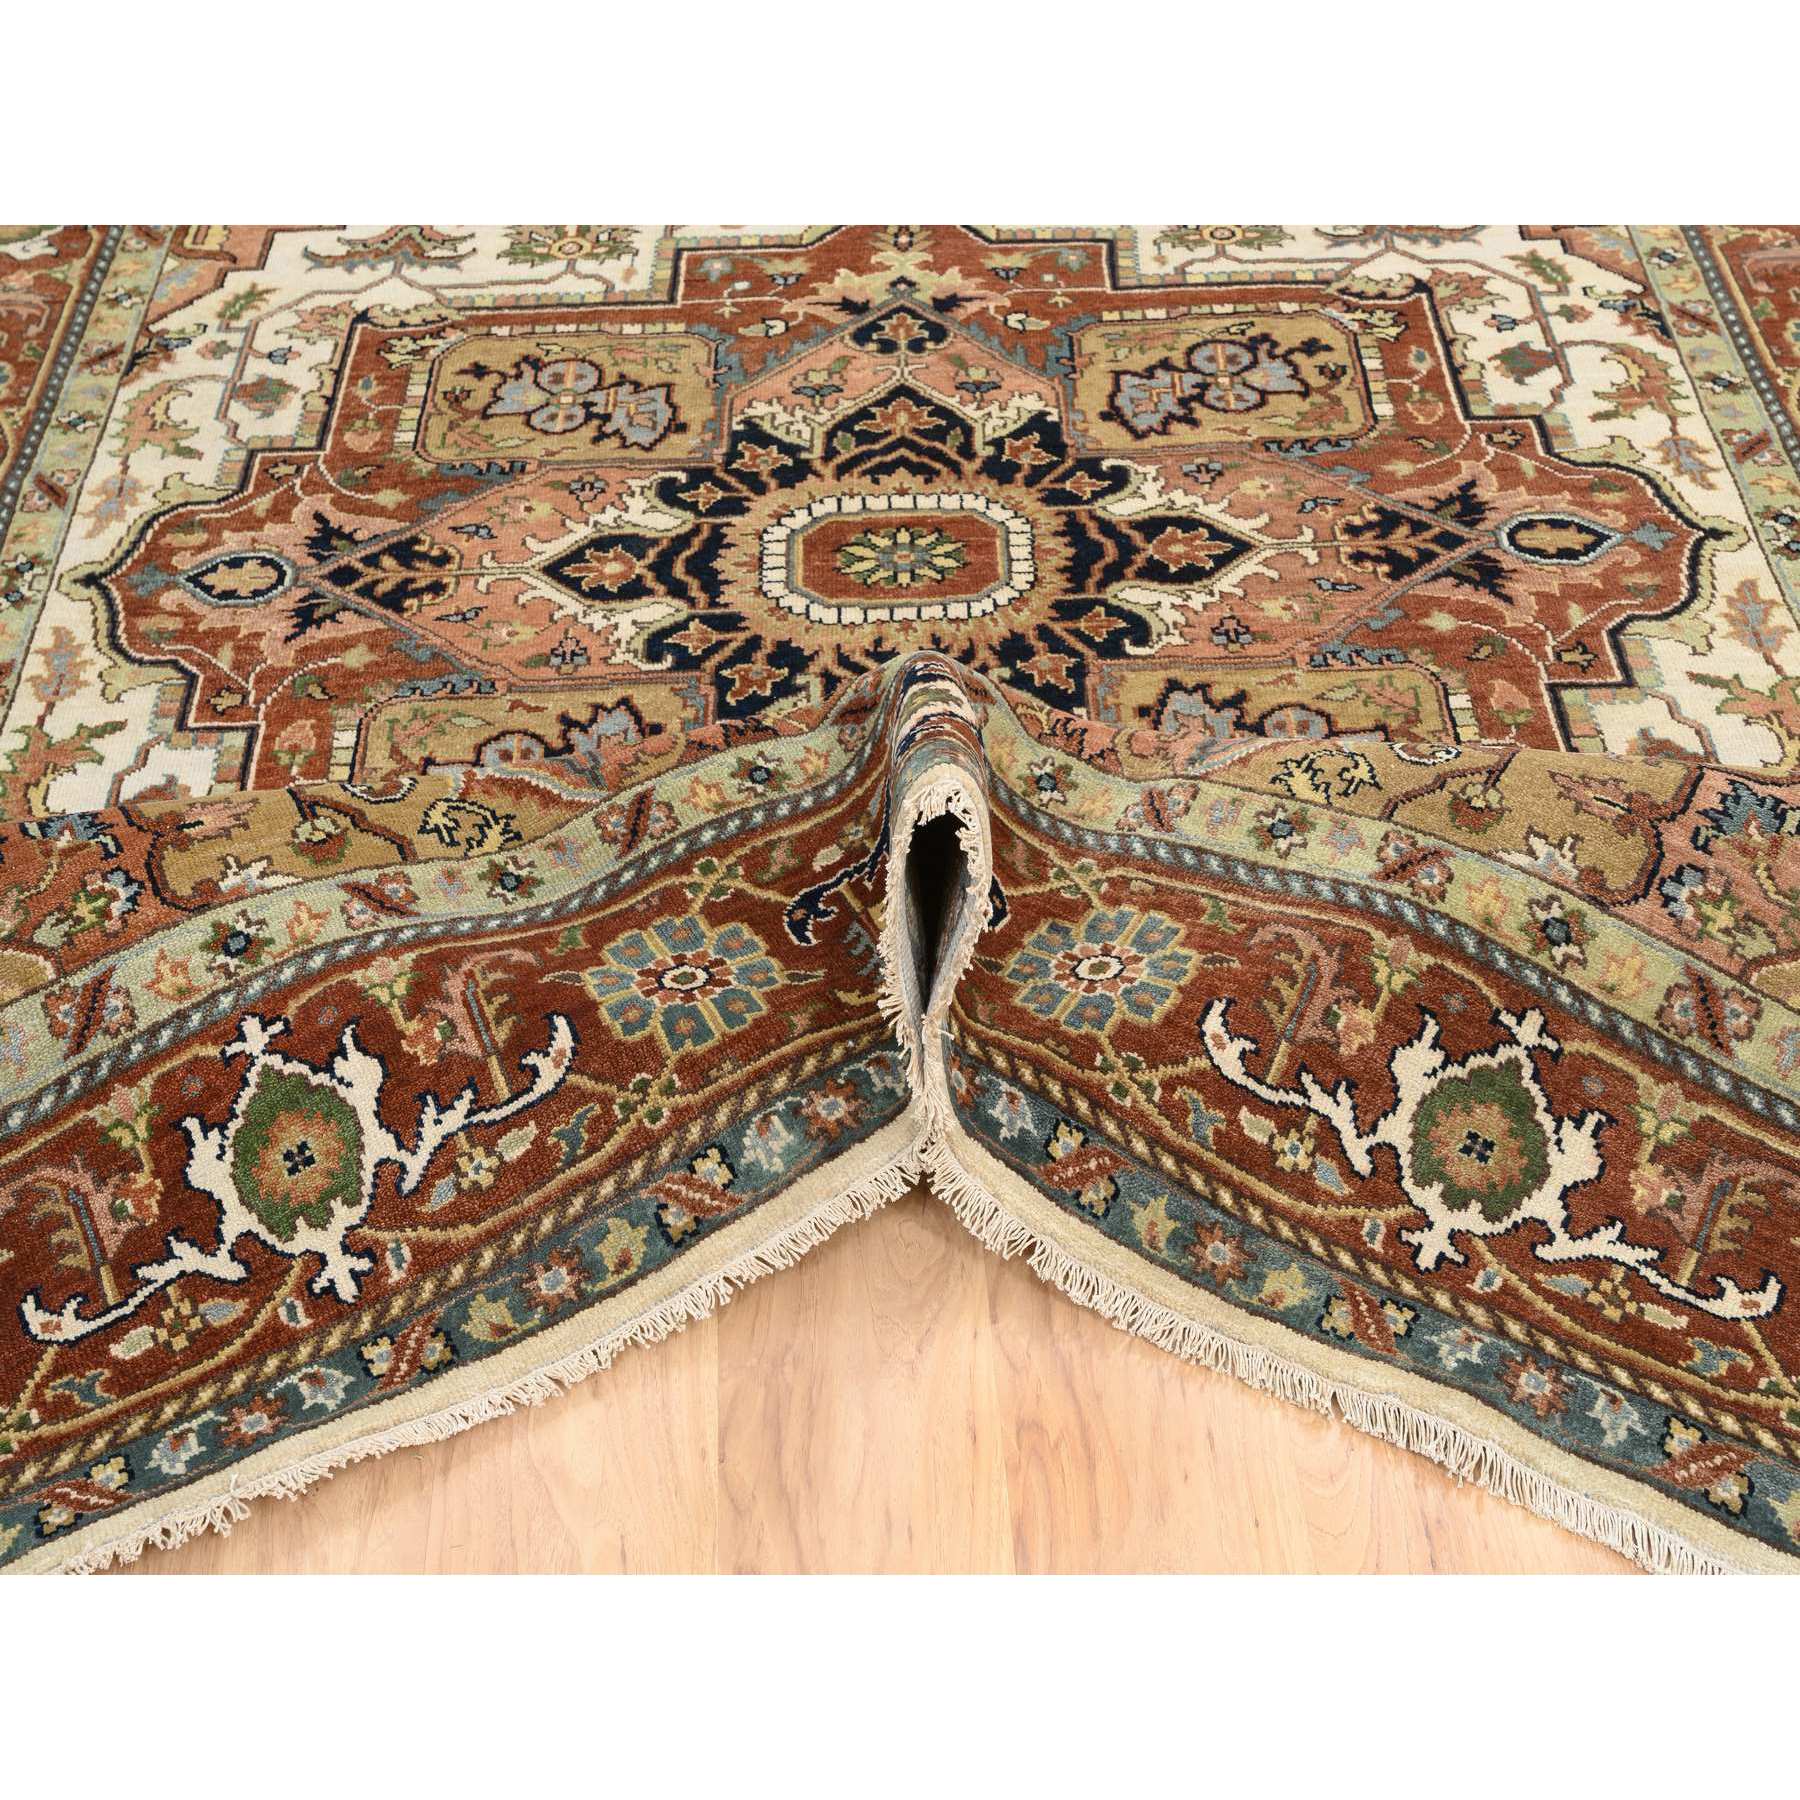 7'10"x10' Ivory and Rust, Hand Woven Heriz with Classic Geometric Medallion Design, Thick and Plush Pure Wool, Oriental Rug 